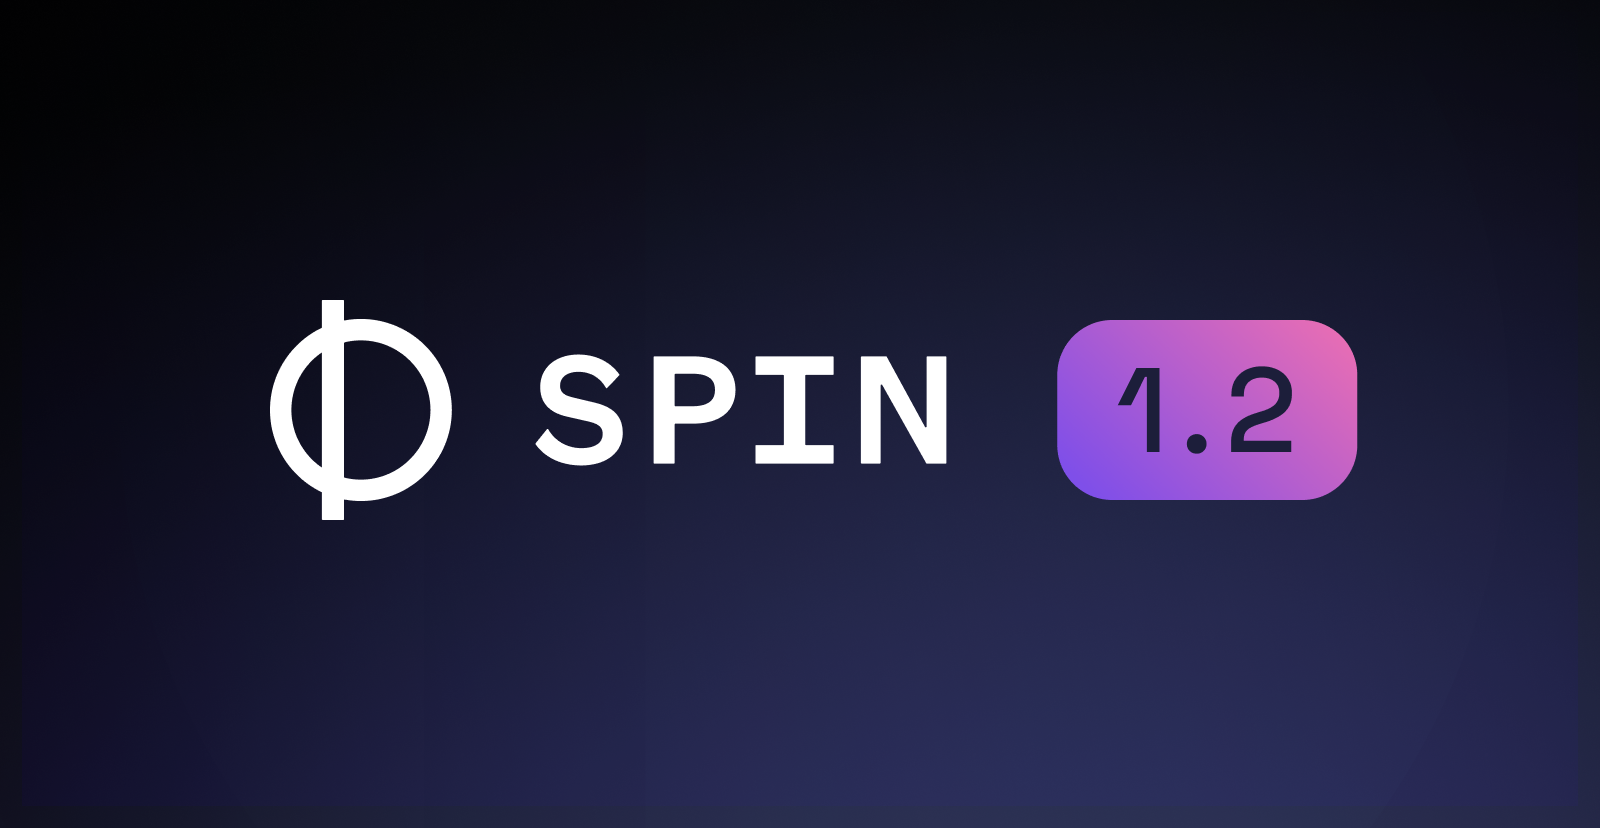 Announcing Spin 1.2